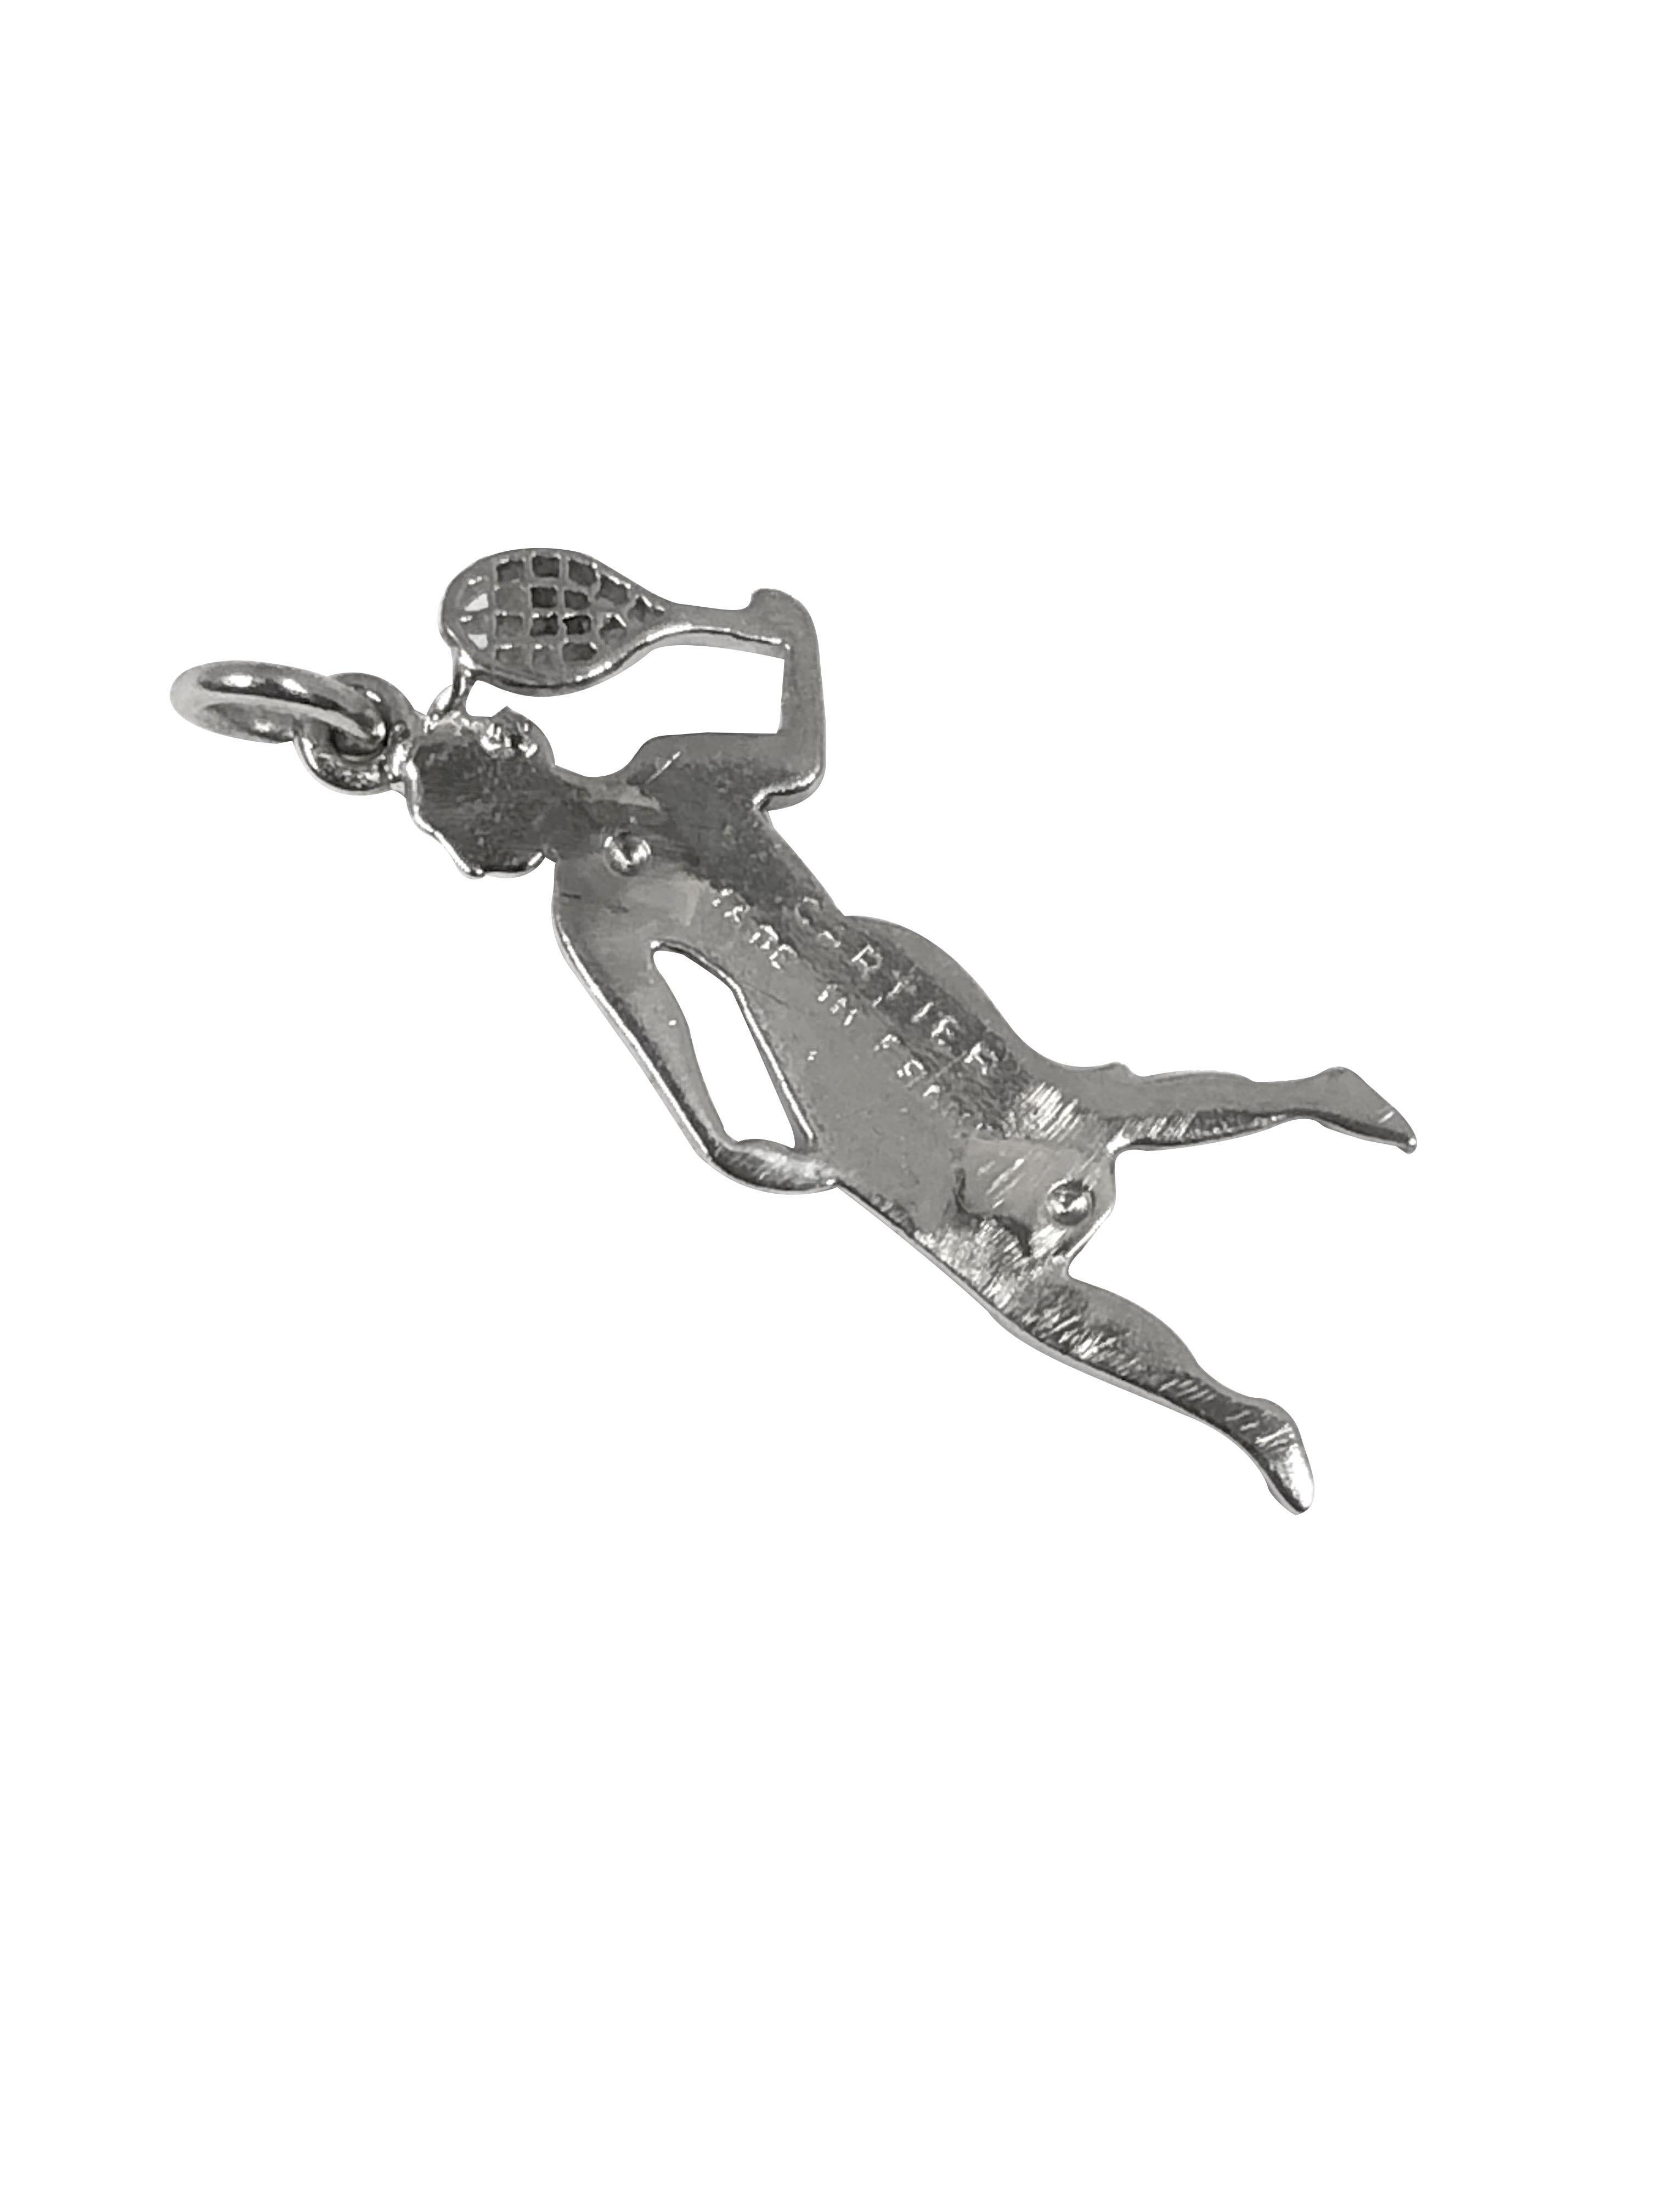 Cartier France Art Deco Platinum and Diamond Tennis Player Charm In Excellent Condition For Sale In Chicago, IL